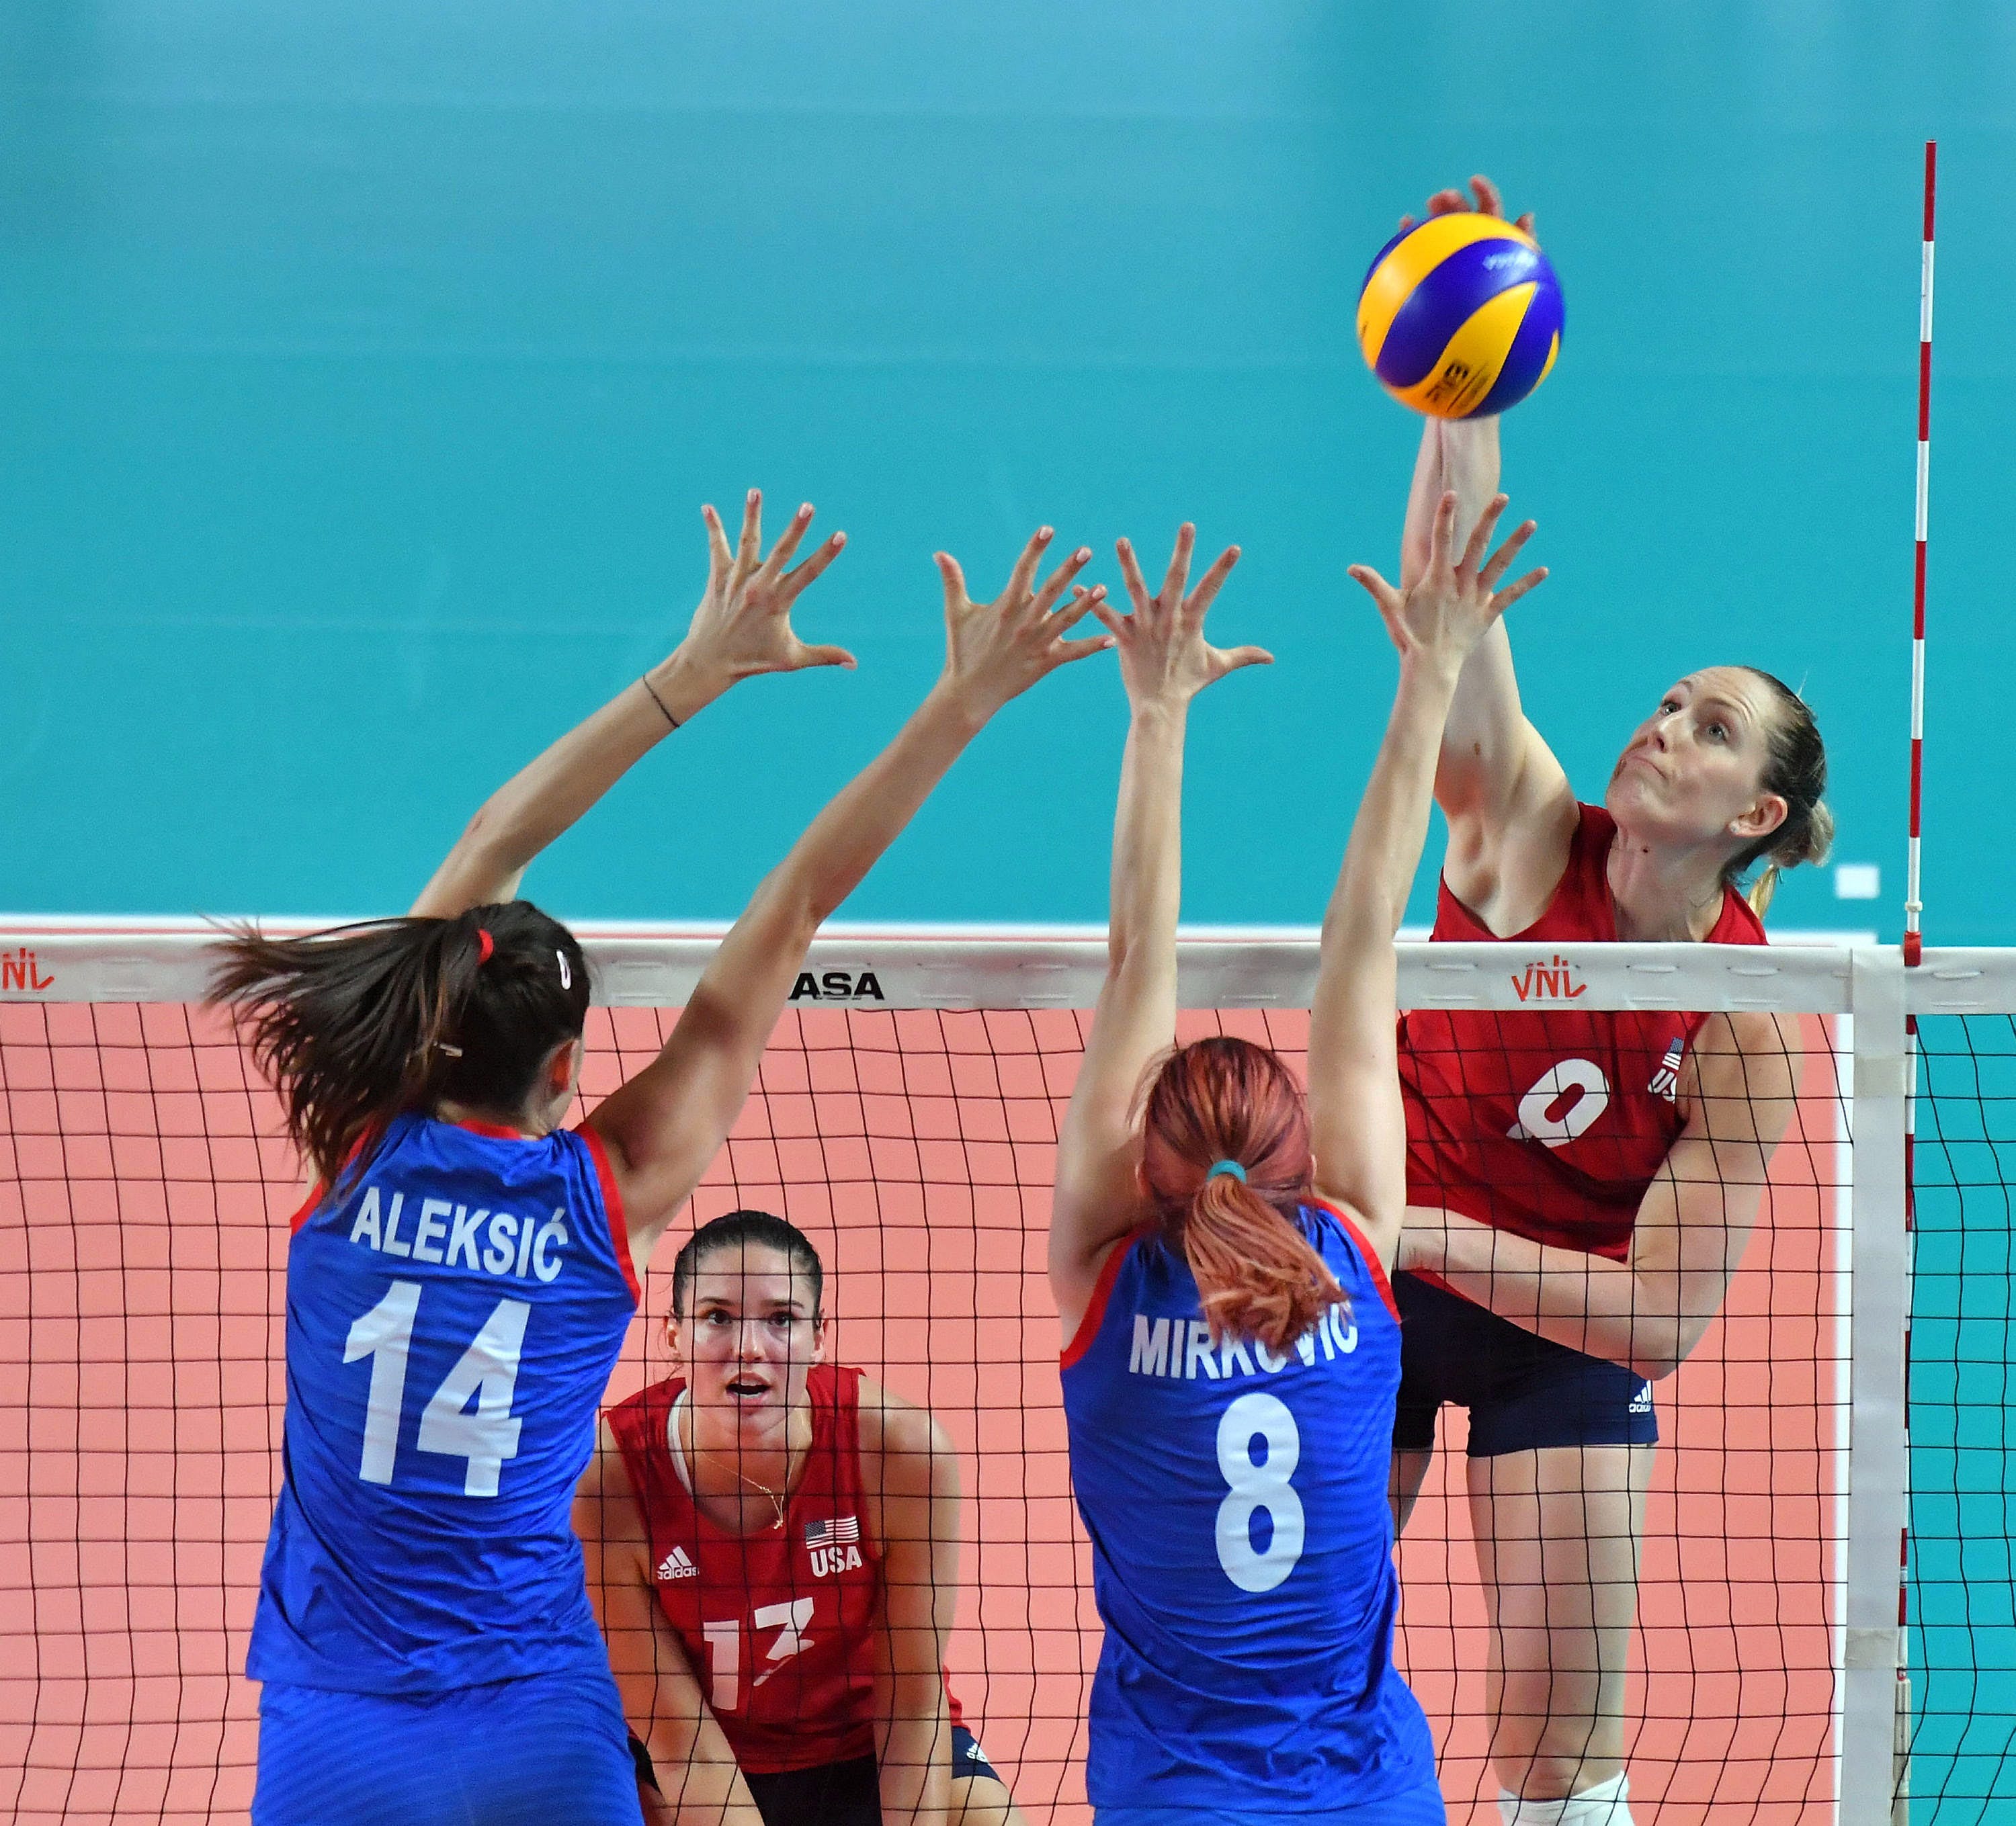 U S Olympic Volleyball Team Within Reach For Arizona Native